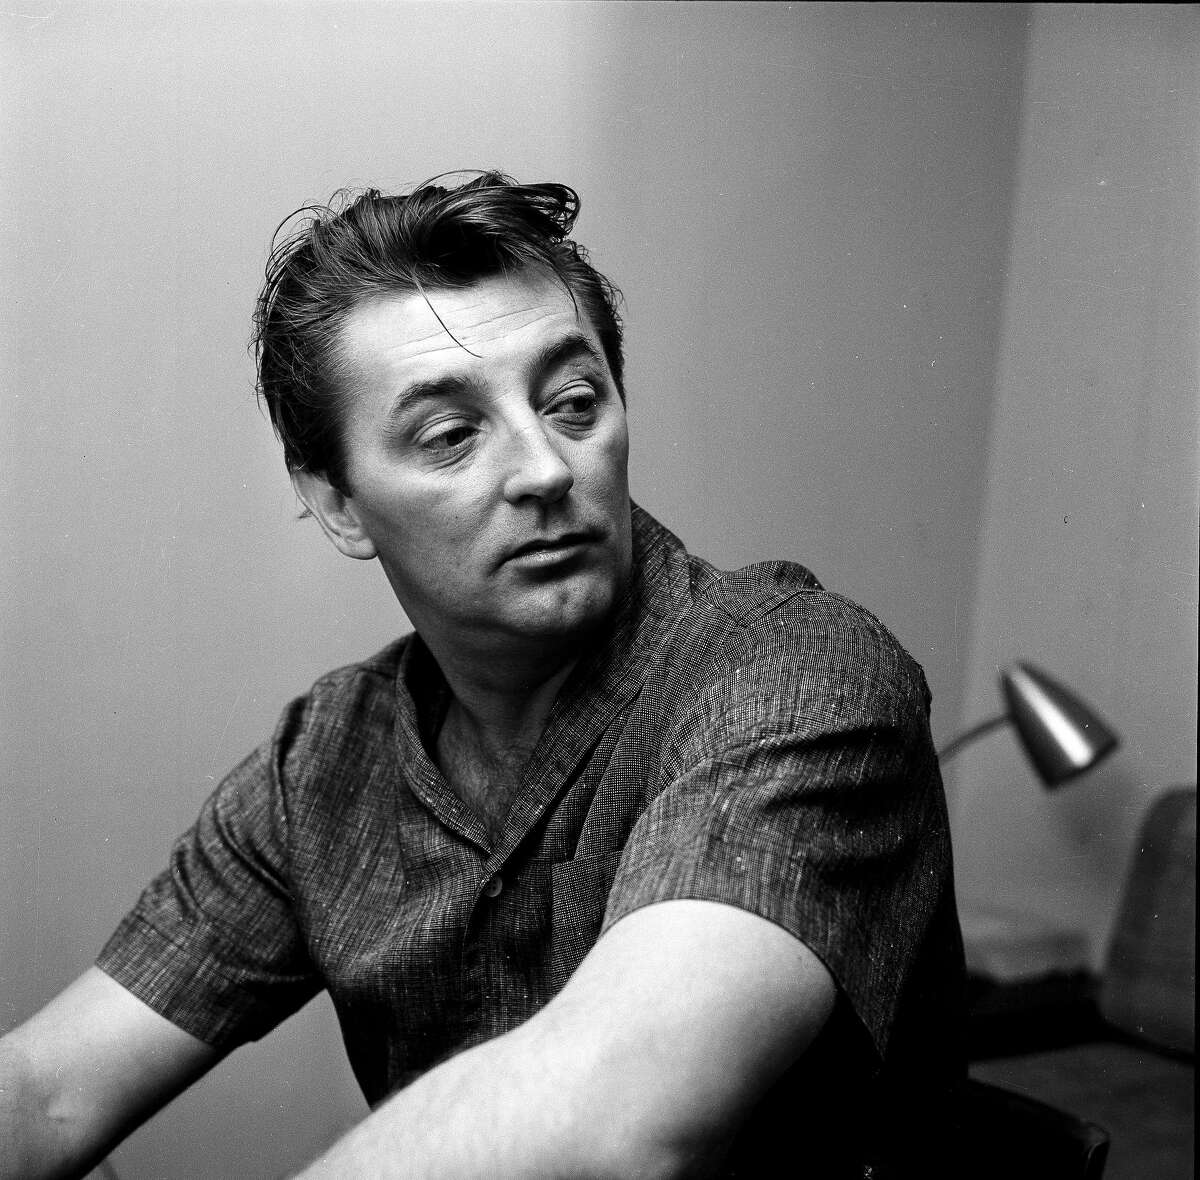 Bridgeport native Robert Mitchum rose to stardom in the 1940s in a new genre of dark thrillers that came to be known as film noir.